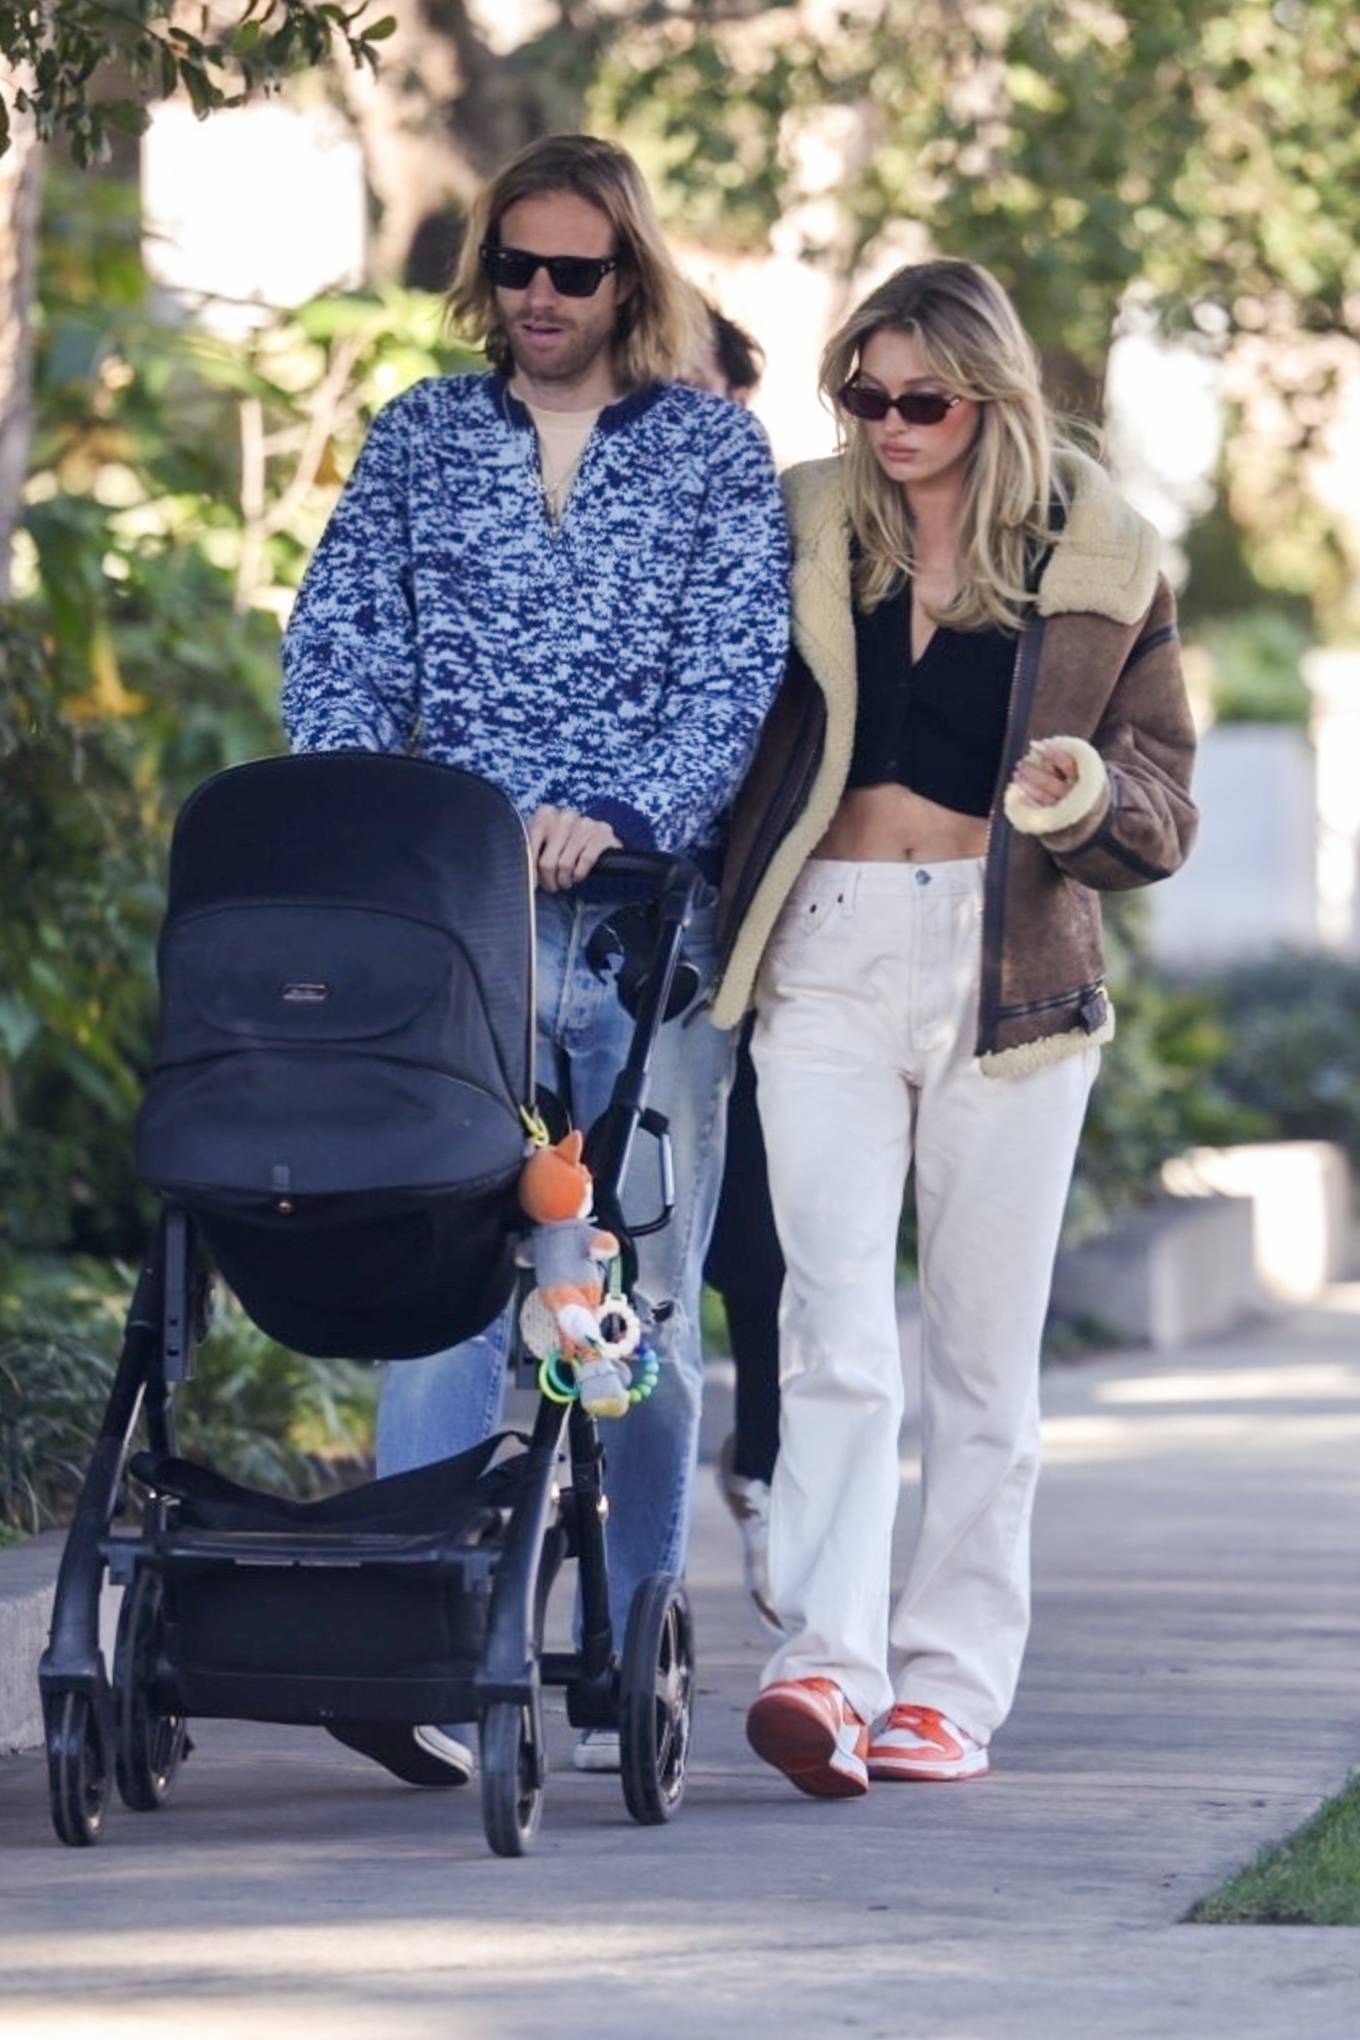 Elsa Hosk - With Tom Daly on a morning stroll in West Hollywood